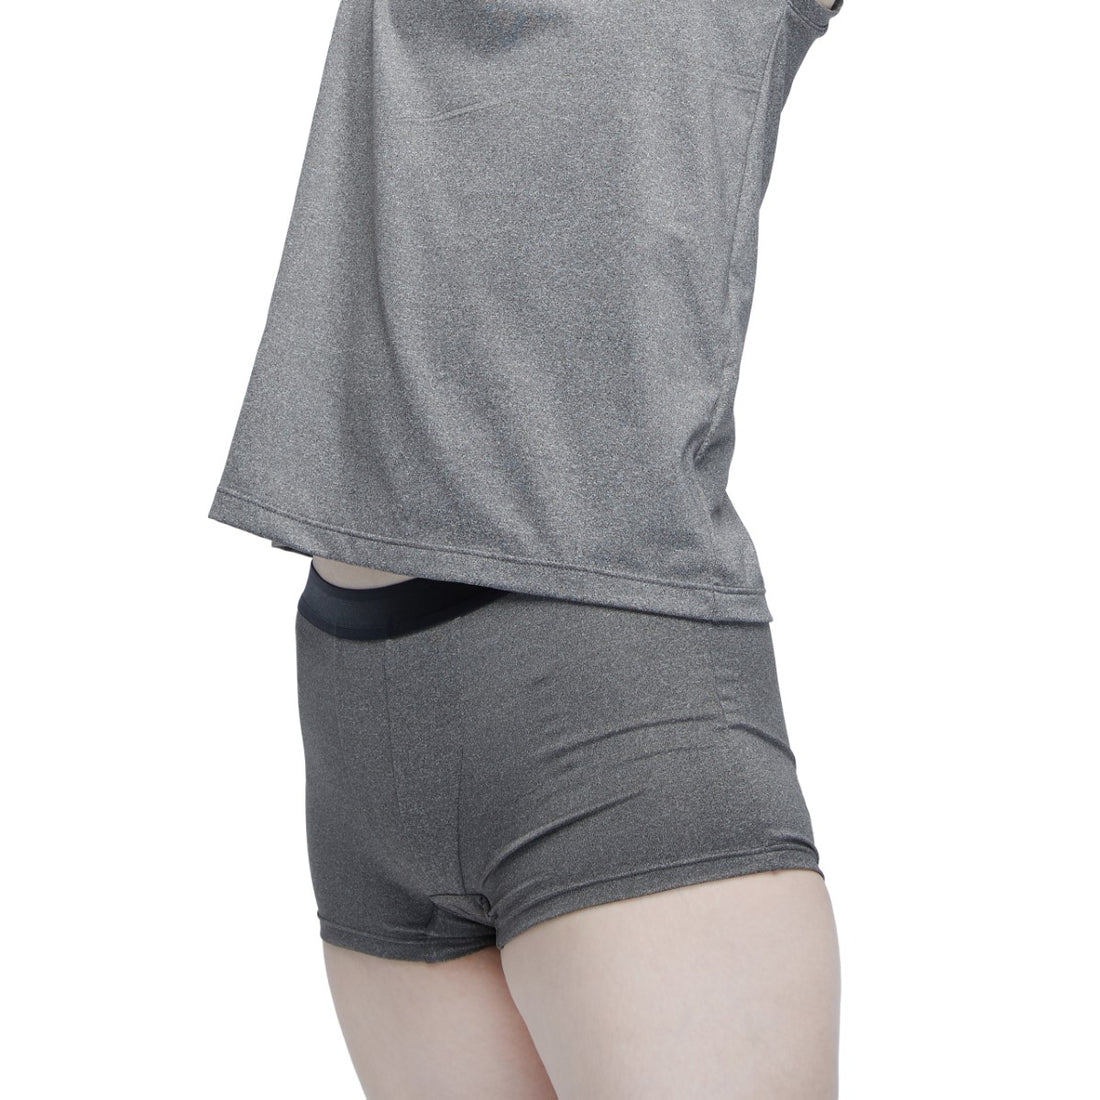 Wacoal FREEDOM Full body tank top (shirt and underwear) model WX1507+WX2602 gray and black (DG)